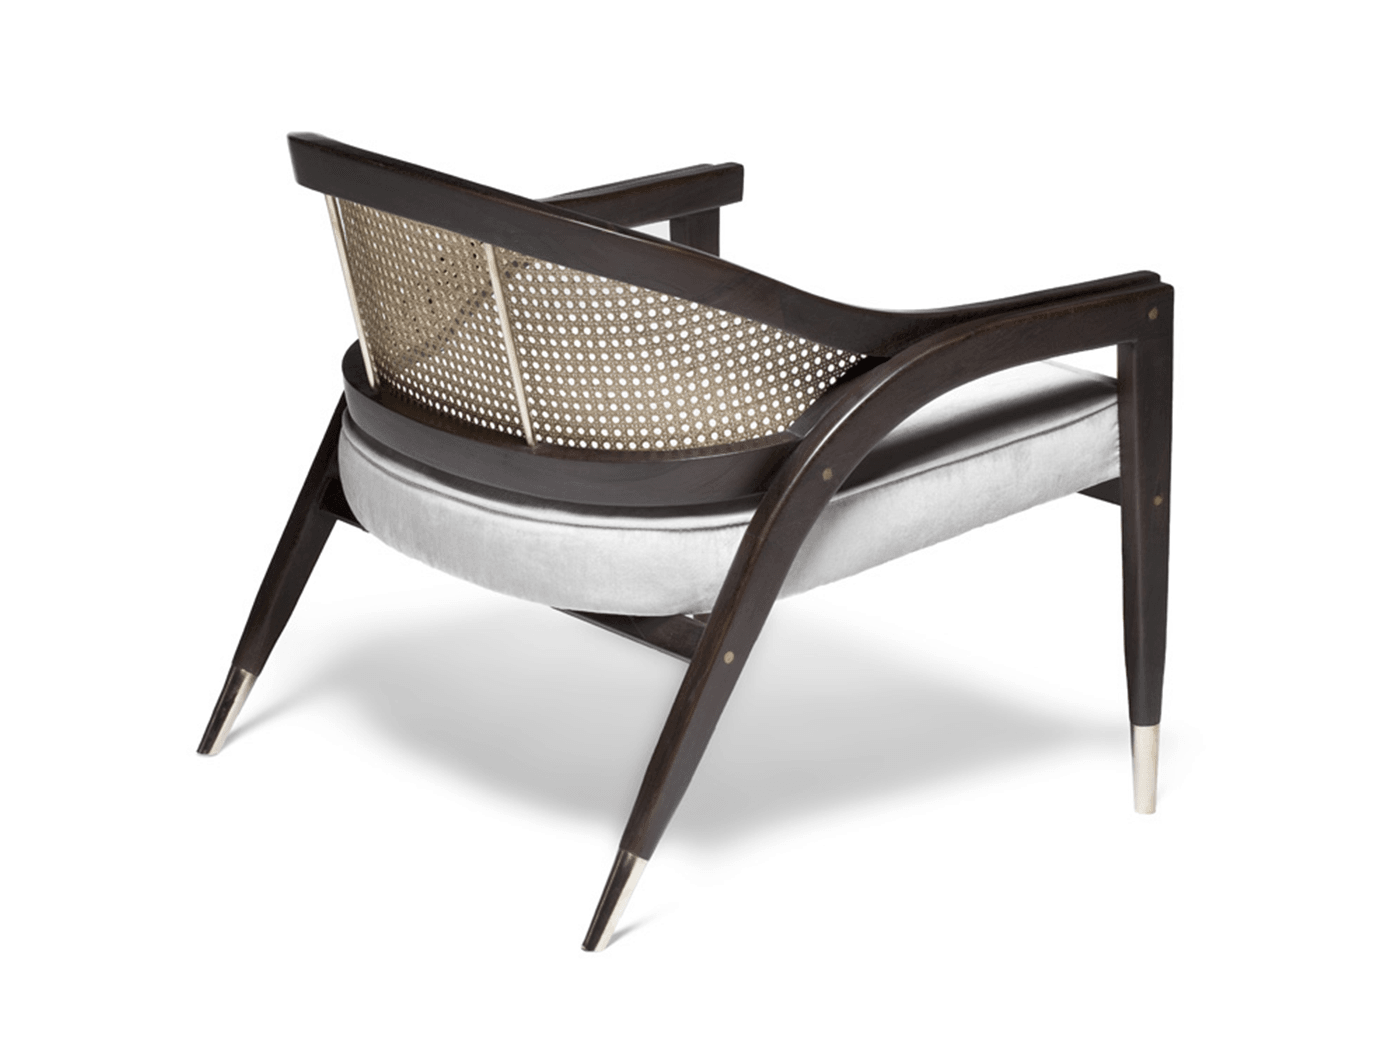 WORMLEY I Lounge chair by Duistt $2,700.00